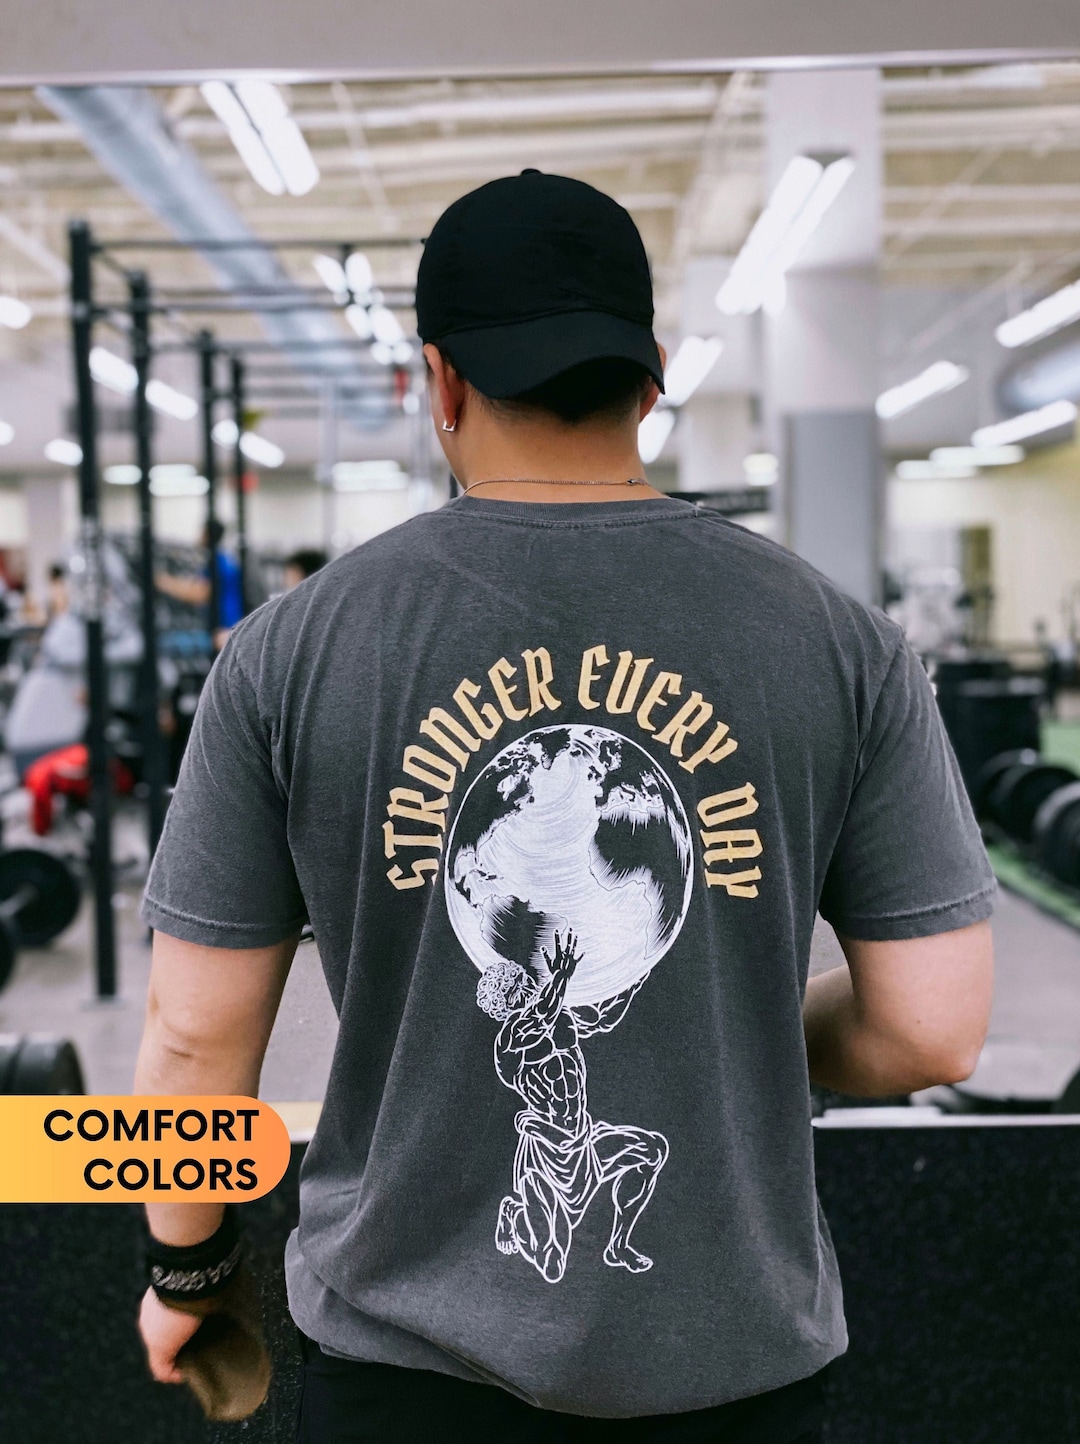 Stronger Every Day Shirt Comfort Color Shirt Gym Shirt Pump - Etsy